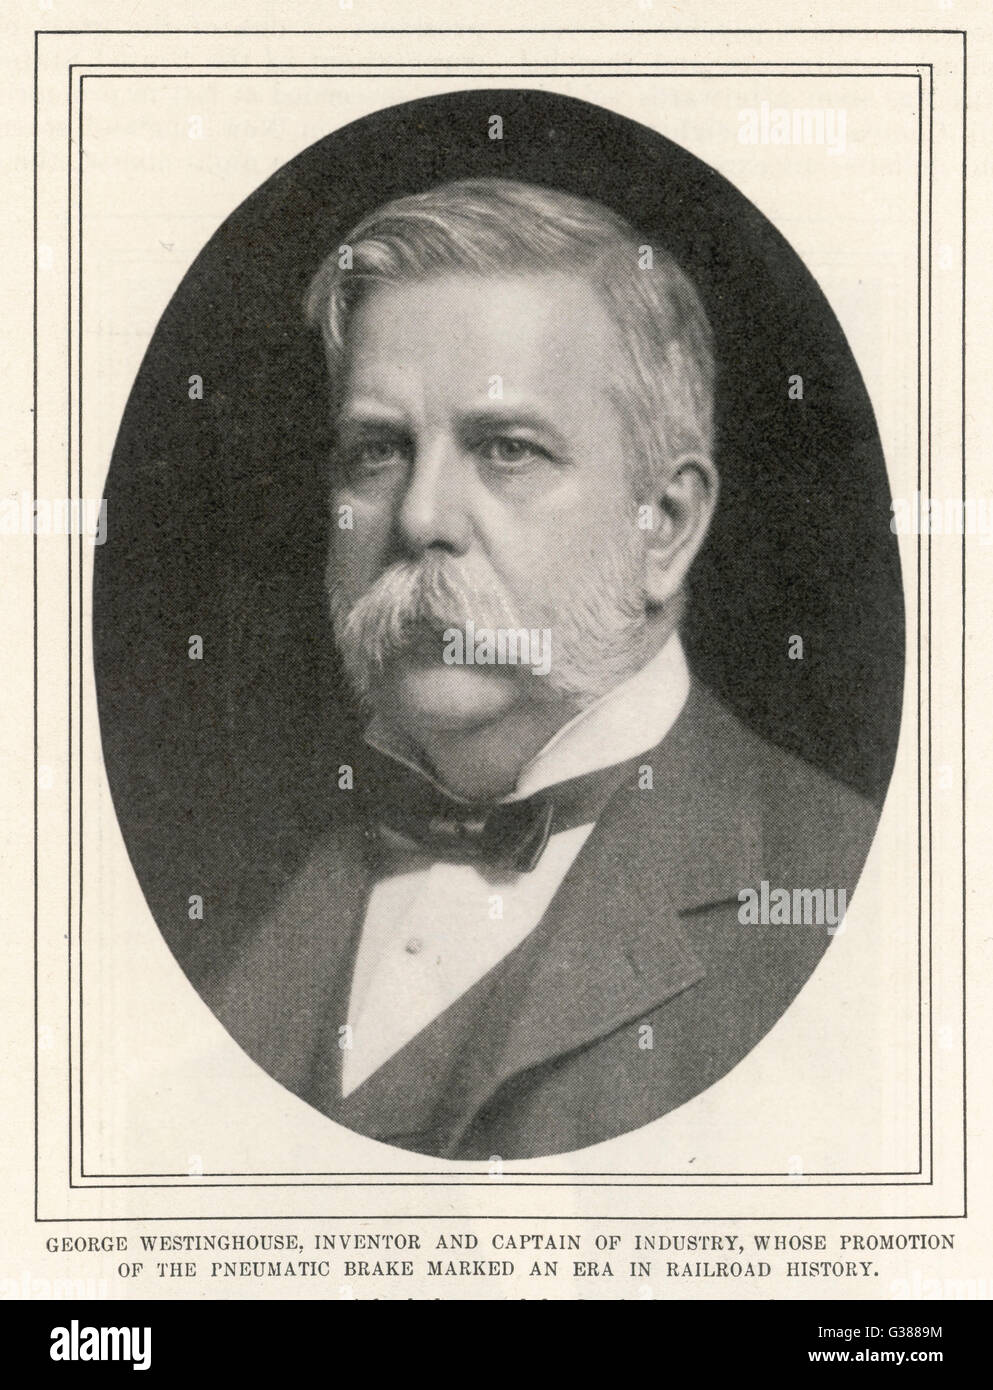 GEORGE WESTINGHOUSE  American engineer, noted for work on brakes and  electrical power      Date: 1846 - 1914 Stock Photo